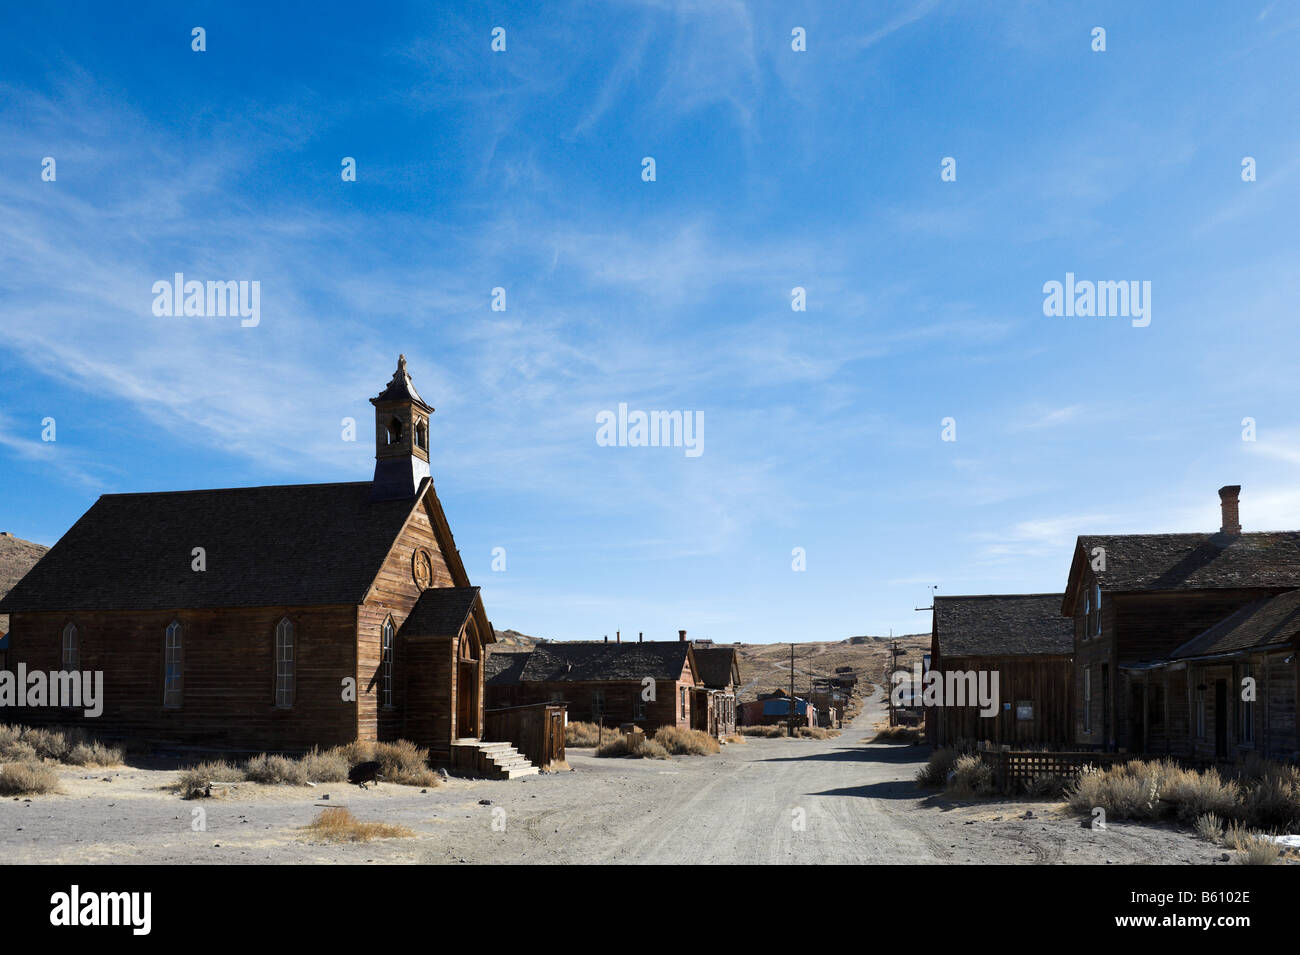 Green Street in the 19thC gold mining ghost town of Bodie, near Bridgeport, Sierra Nevada Mountains, California Stock Photo